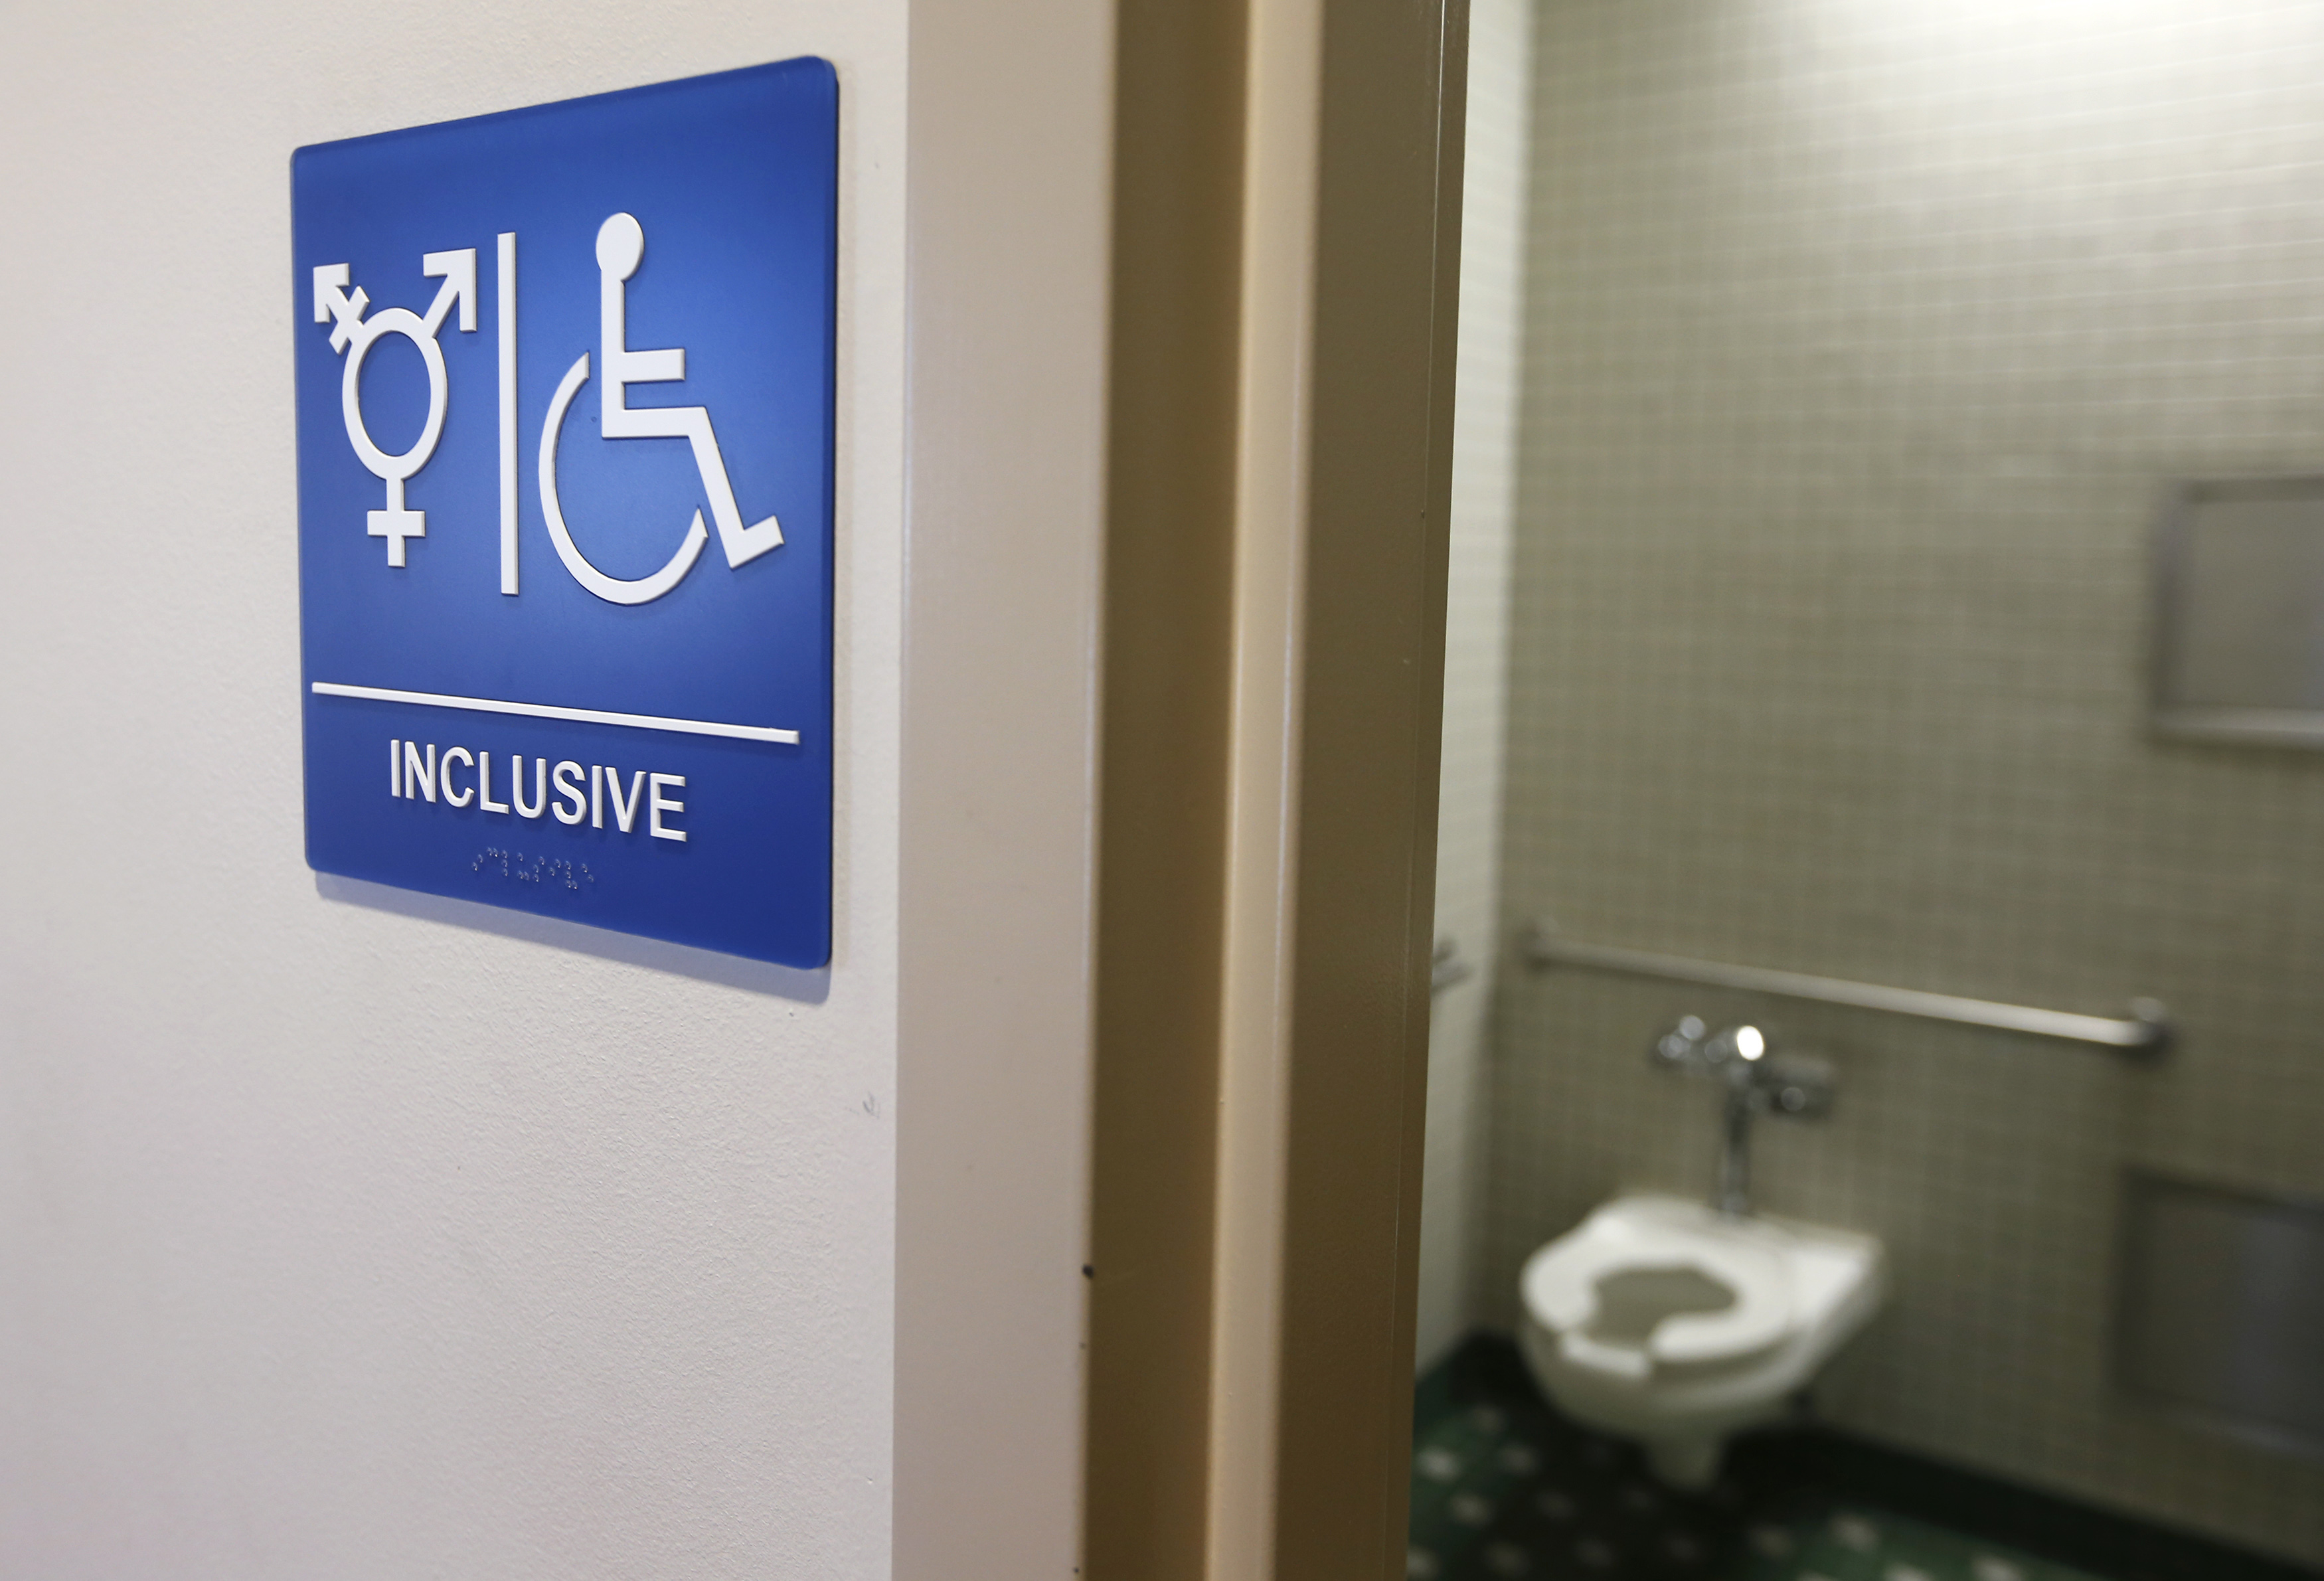 A gender-neutral bathroom is seen at the University of California, Irvine in Irvine, Calif., Sept. 30, 2014. (Lucy Nicholson—Reuters)